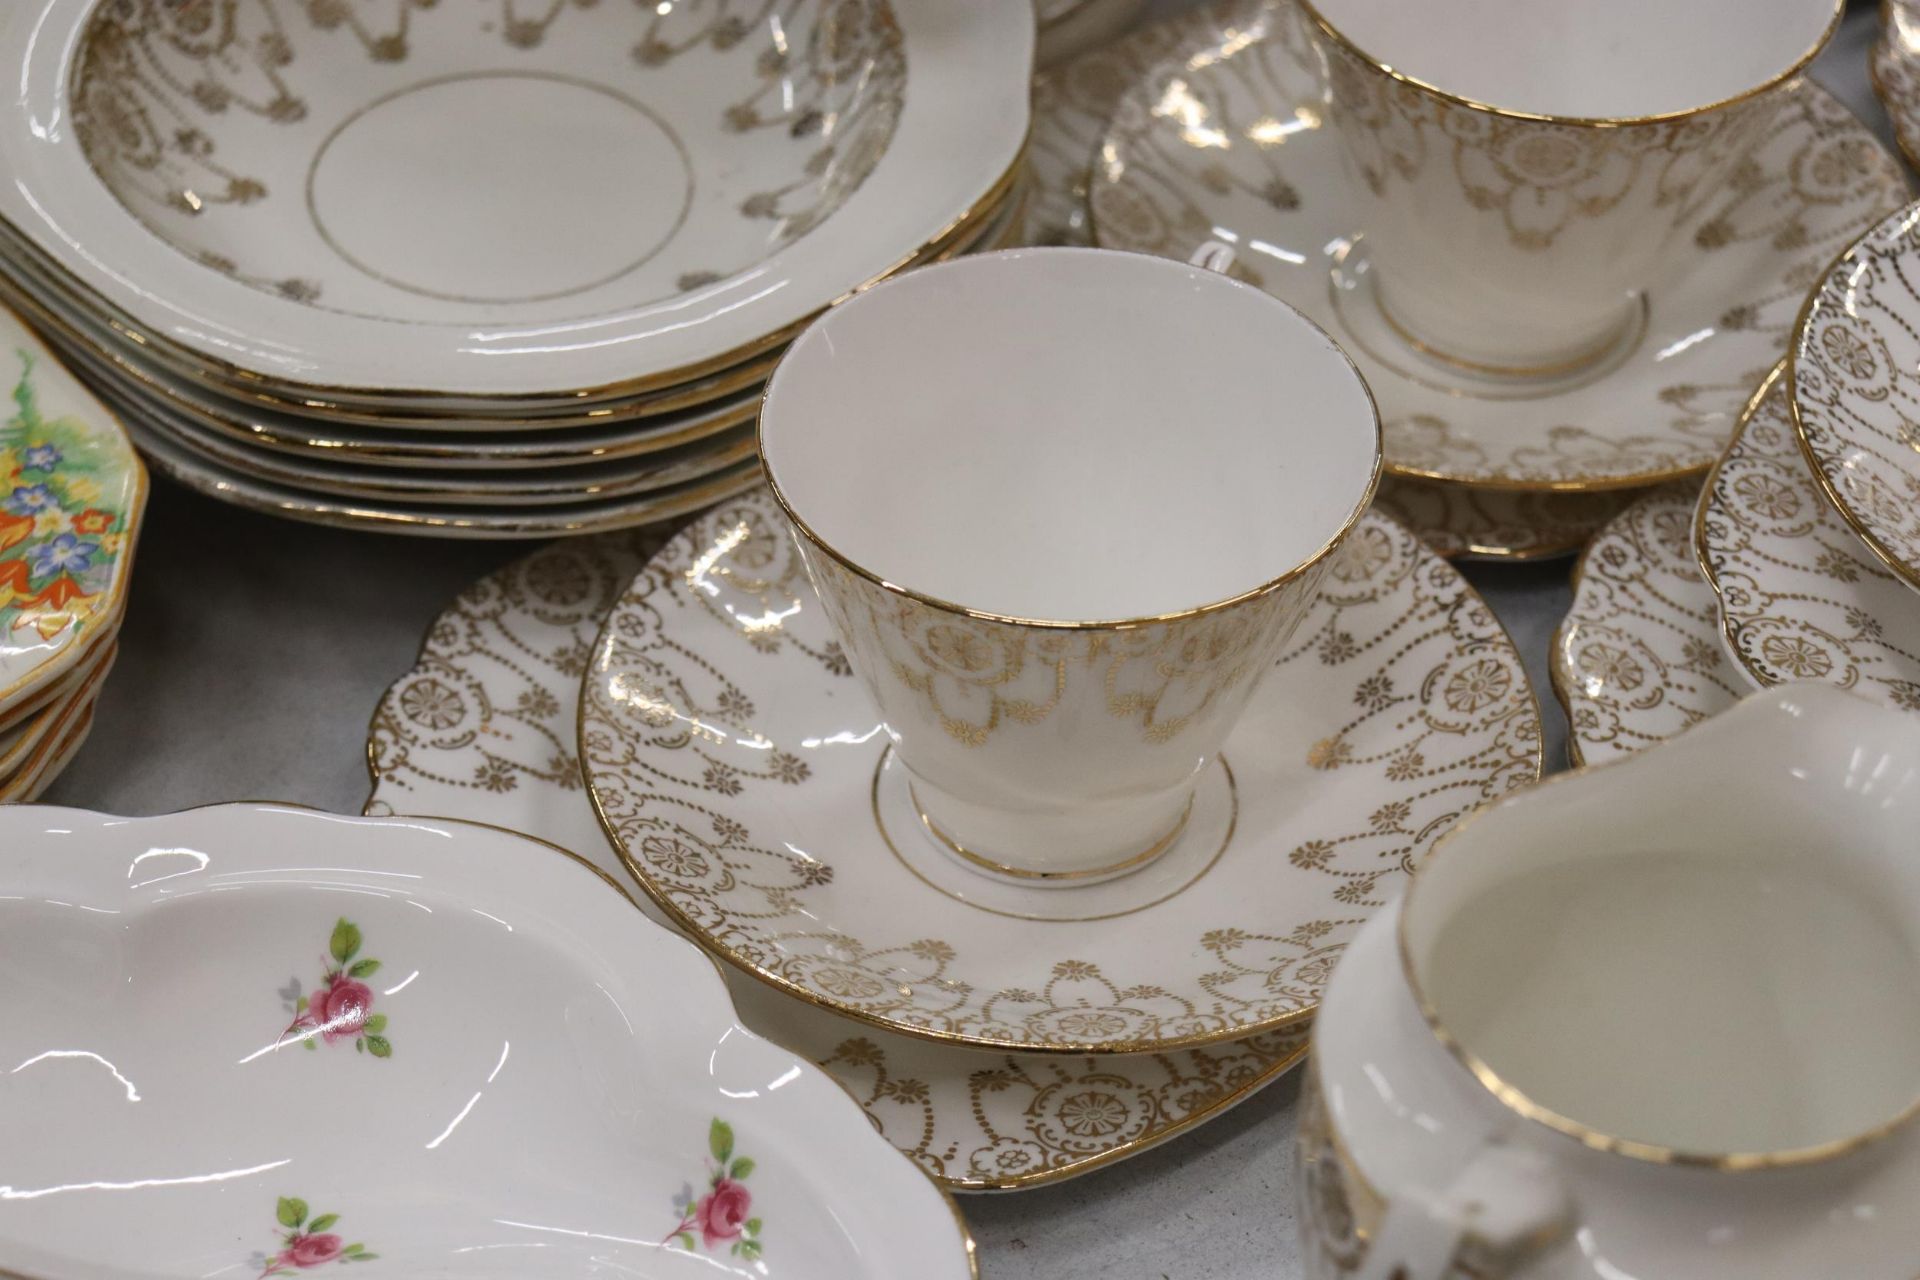 A VINTAGE 'PENDANT' TEASET, TO INCLUDE, A CAKE STAND, CAKE PLATE, BOWLS, A CREAM JUG, SUGAR BOWL, - Image 8 of 14